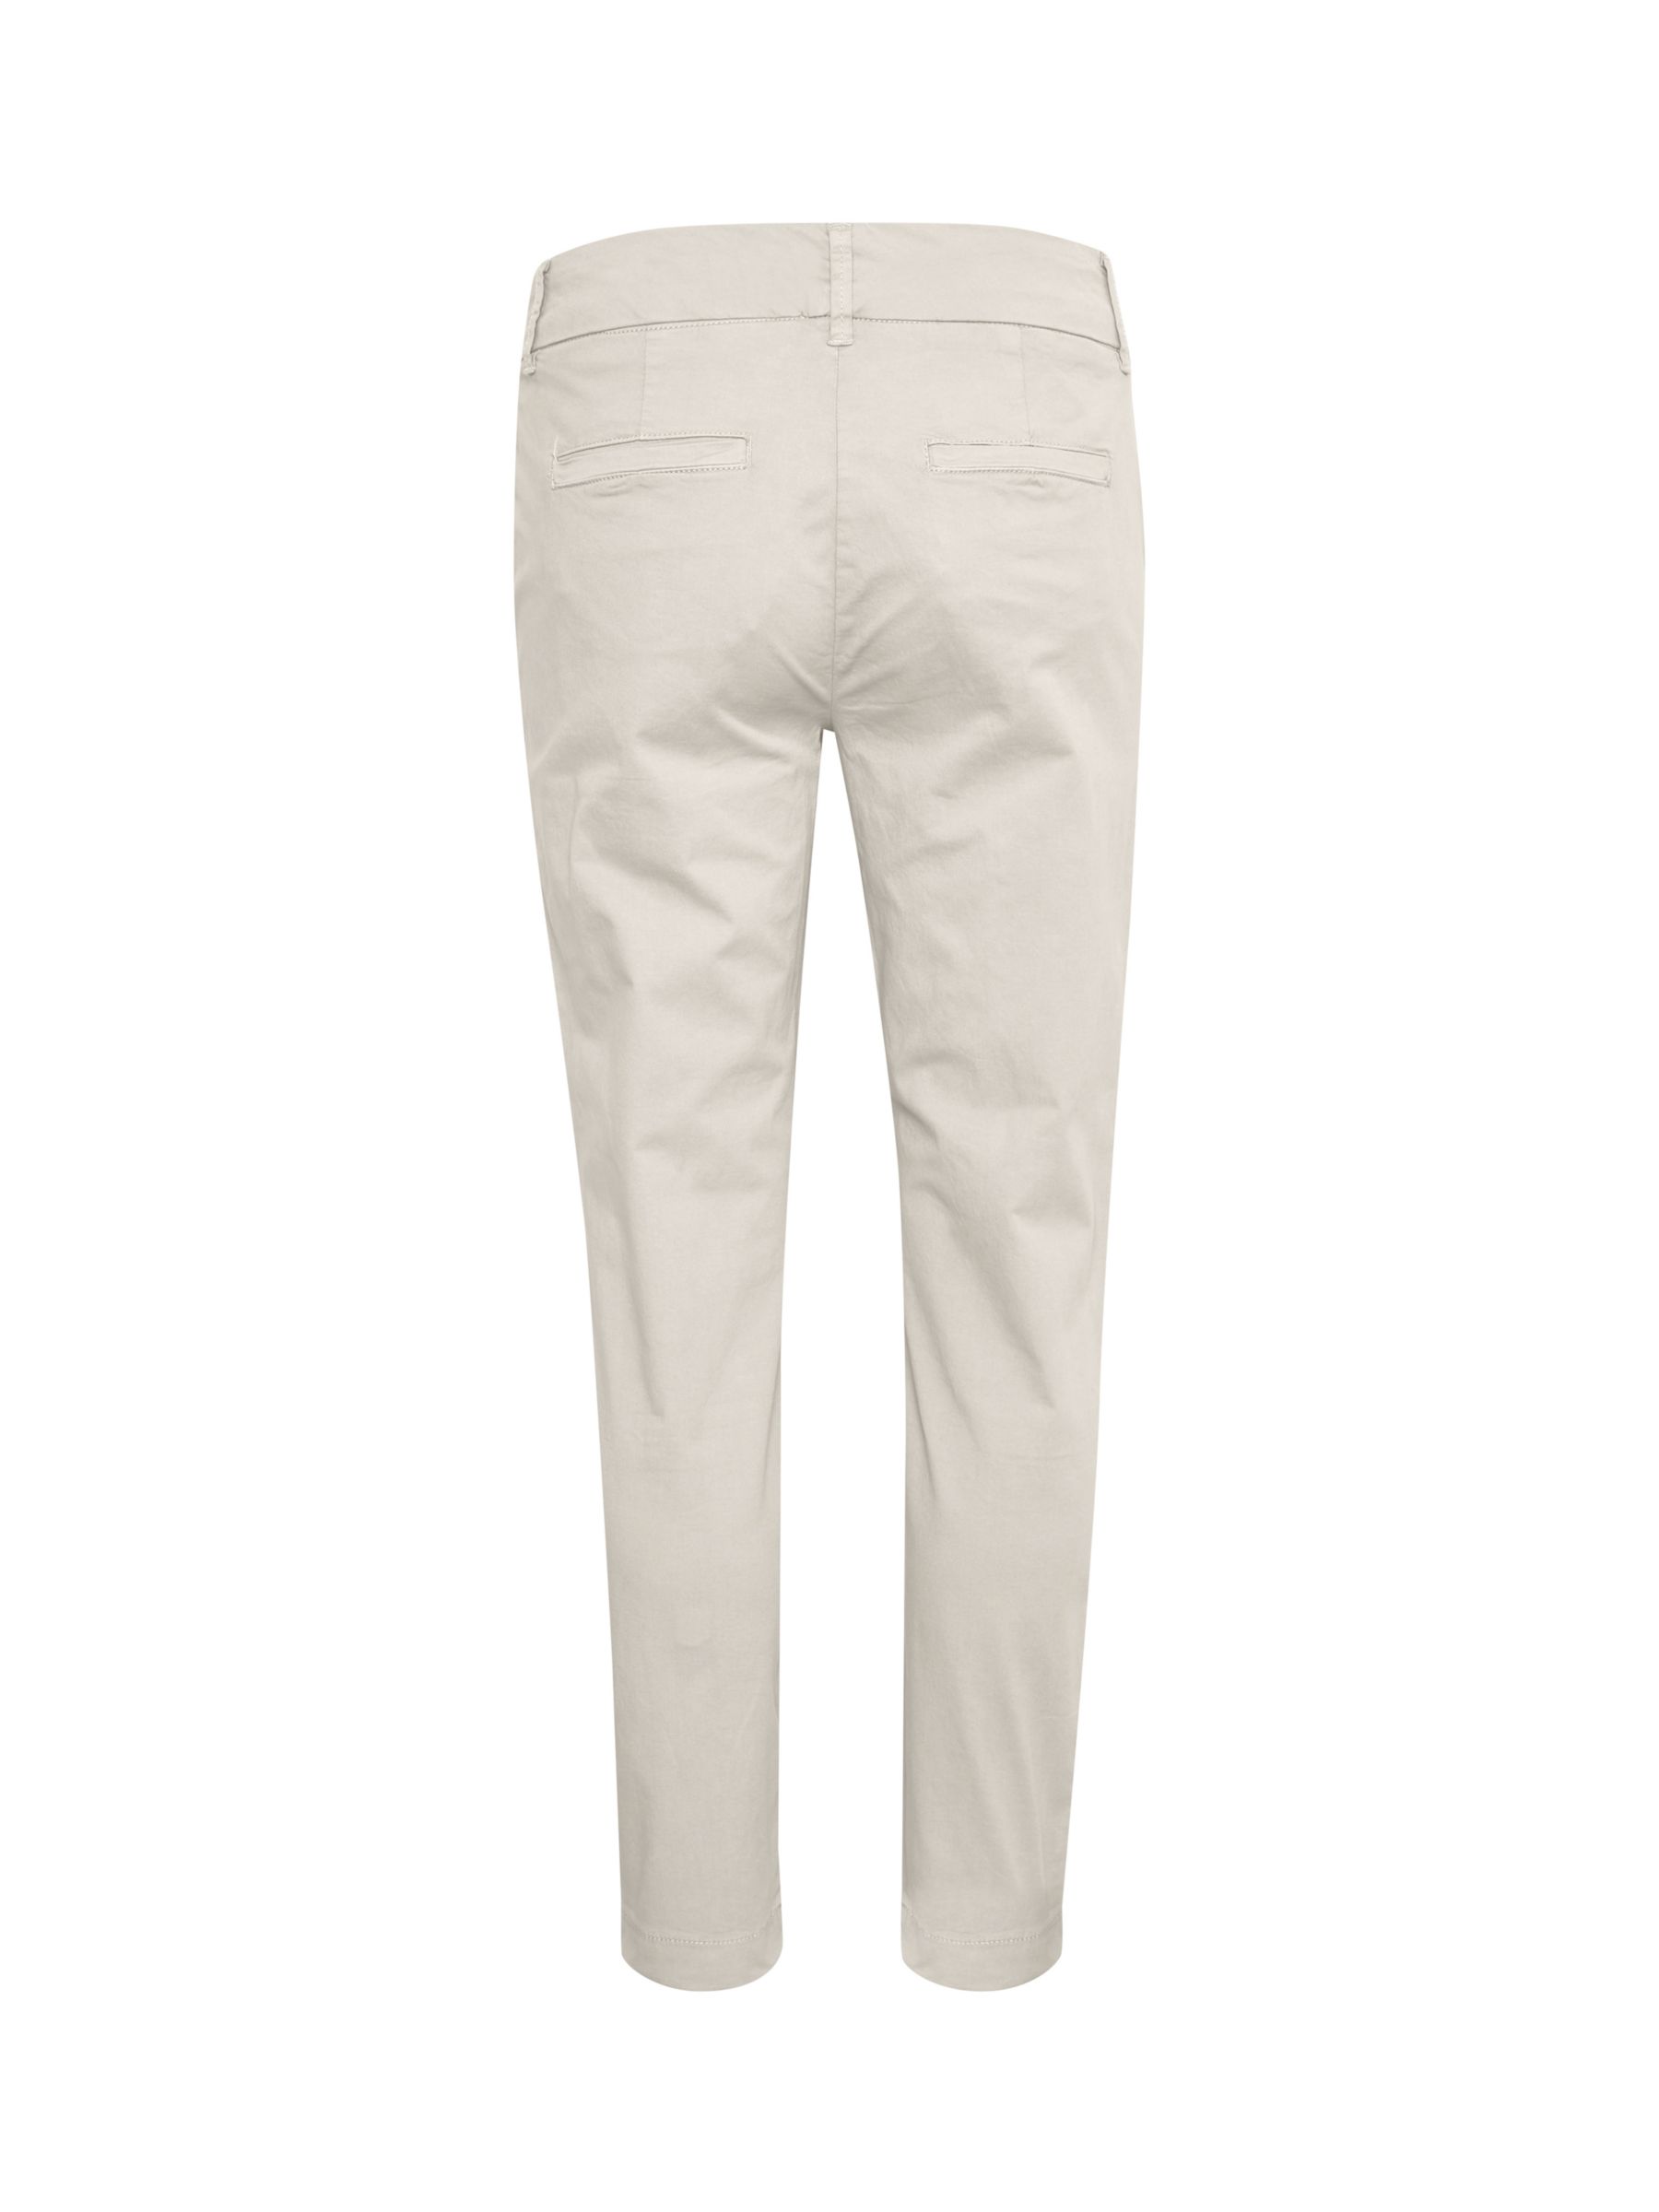 Buy Part Two Soffys Cropped Chino Trousers Online at johnlewis.com